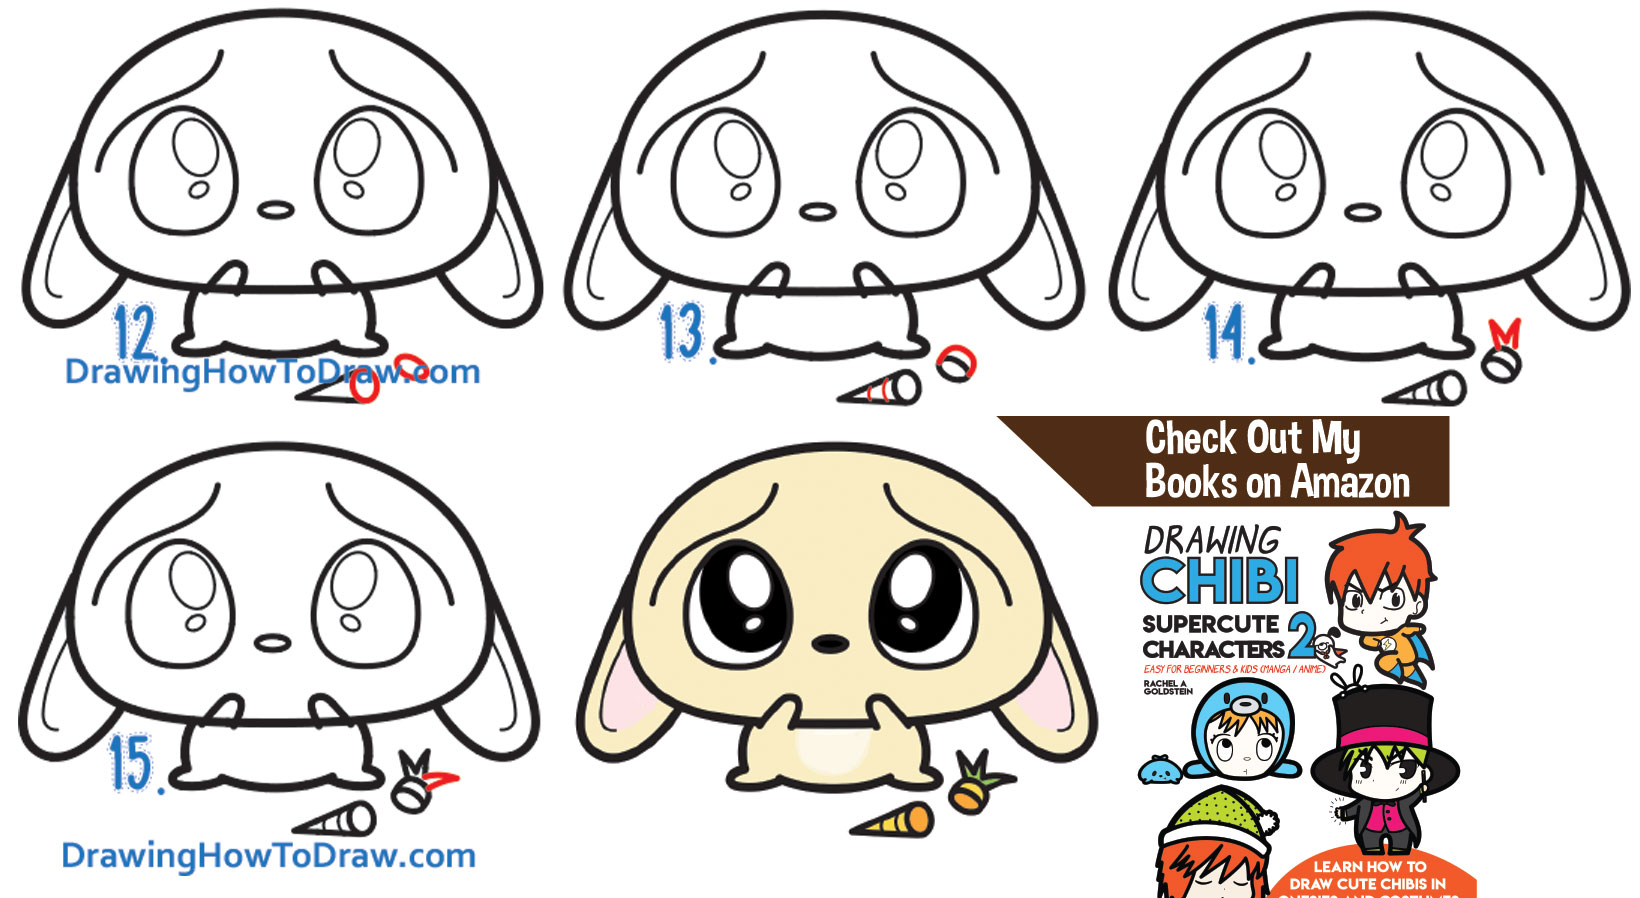 Learn How to Draw a Sad, Scared, Worried Cartoon Bunny Rabbit with Simple Step by Step Drawing Lesson for Kids